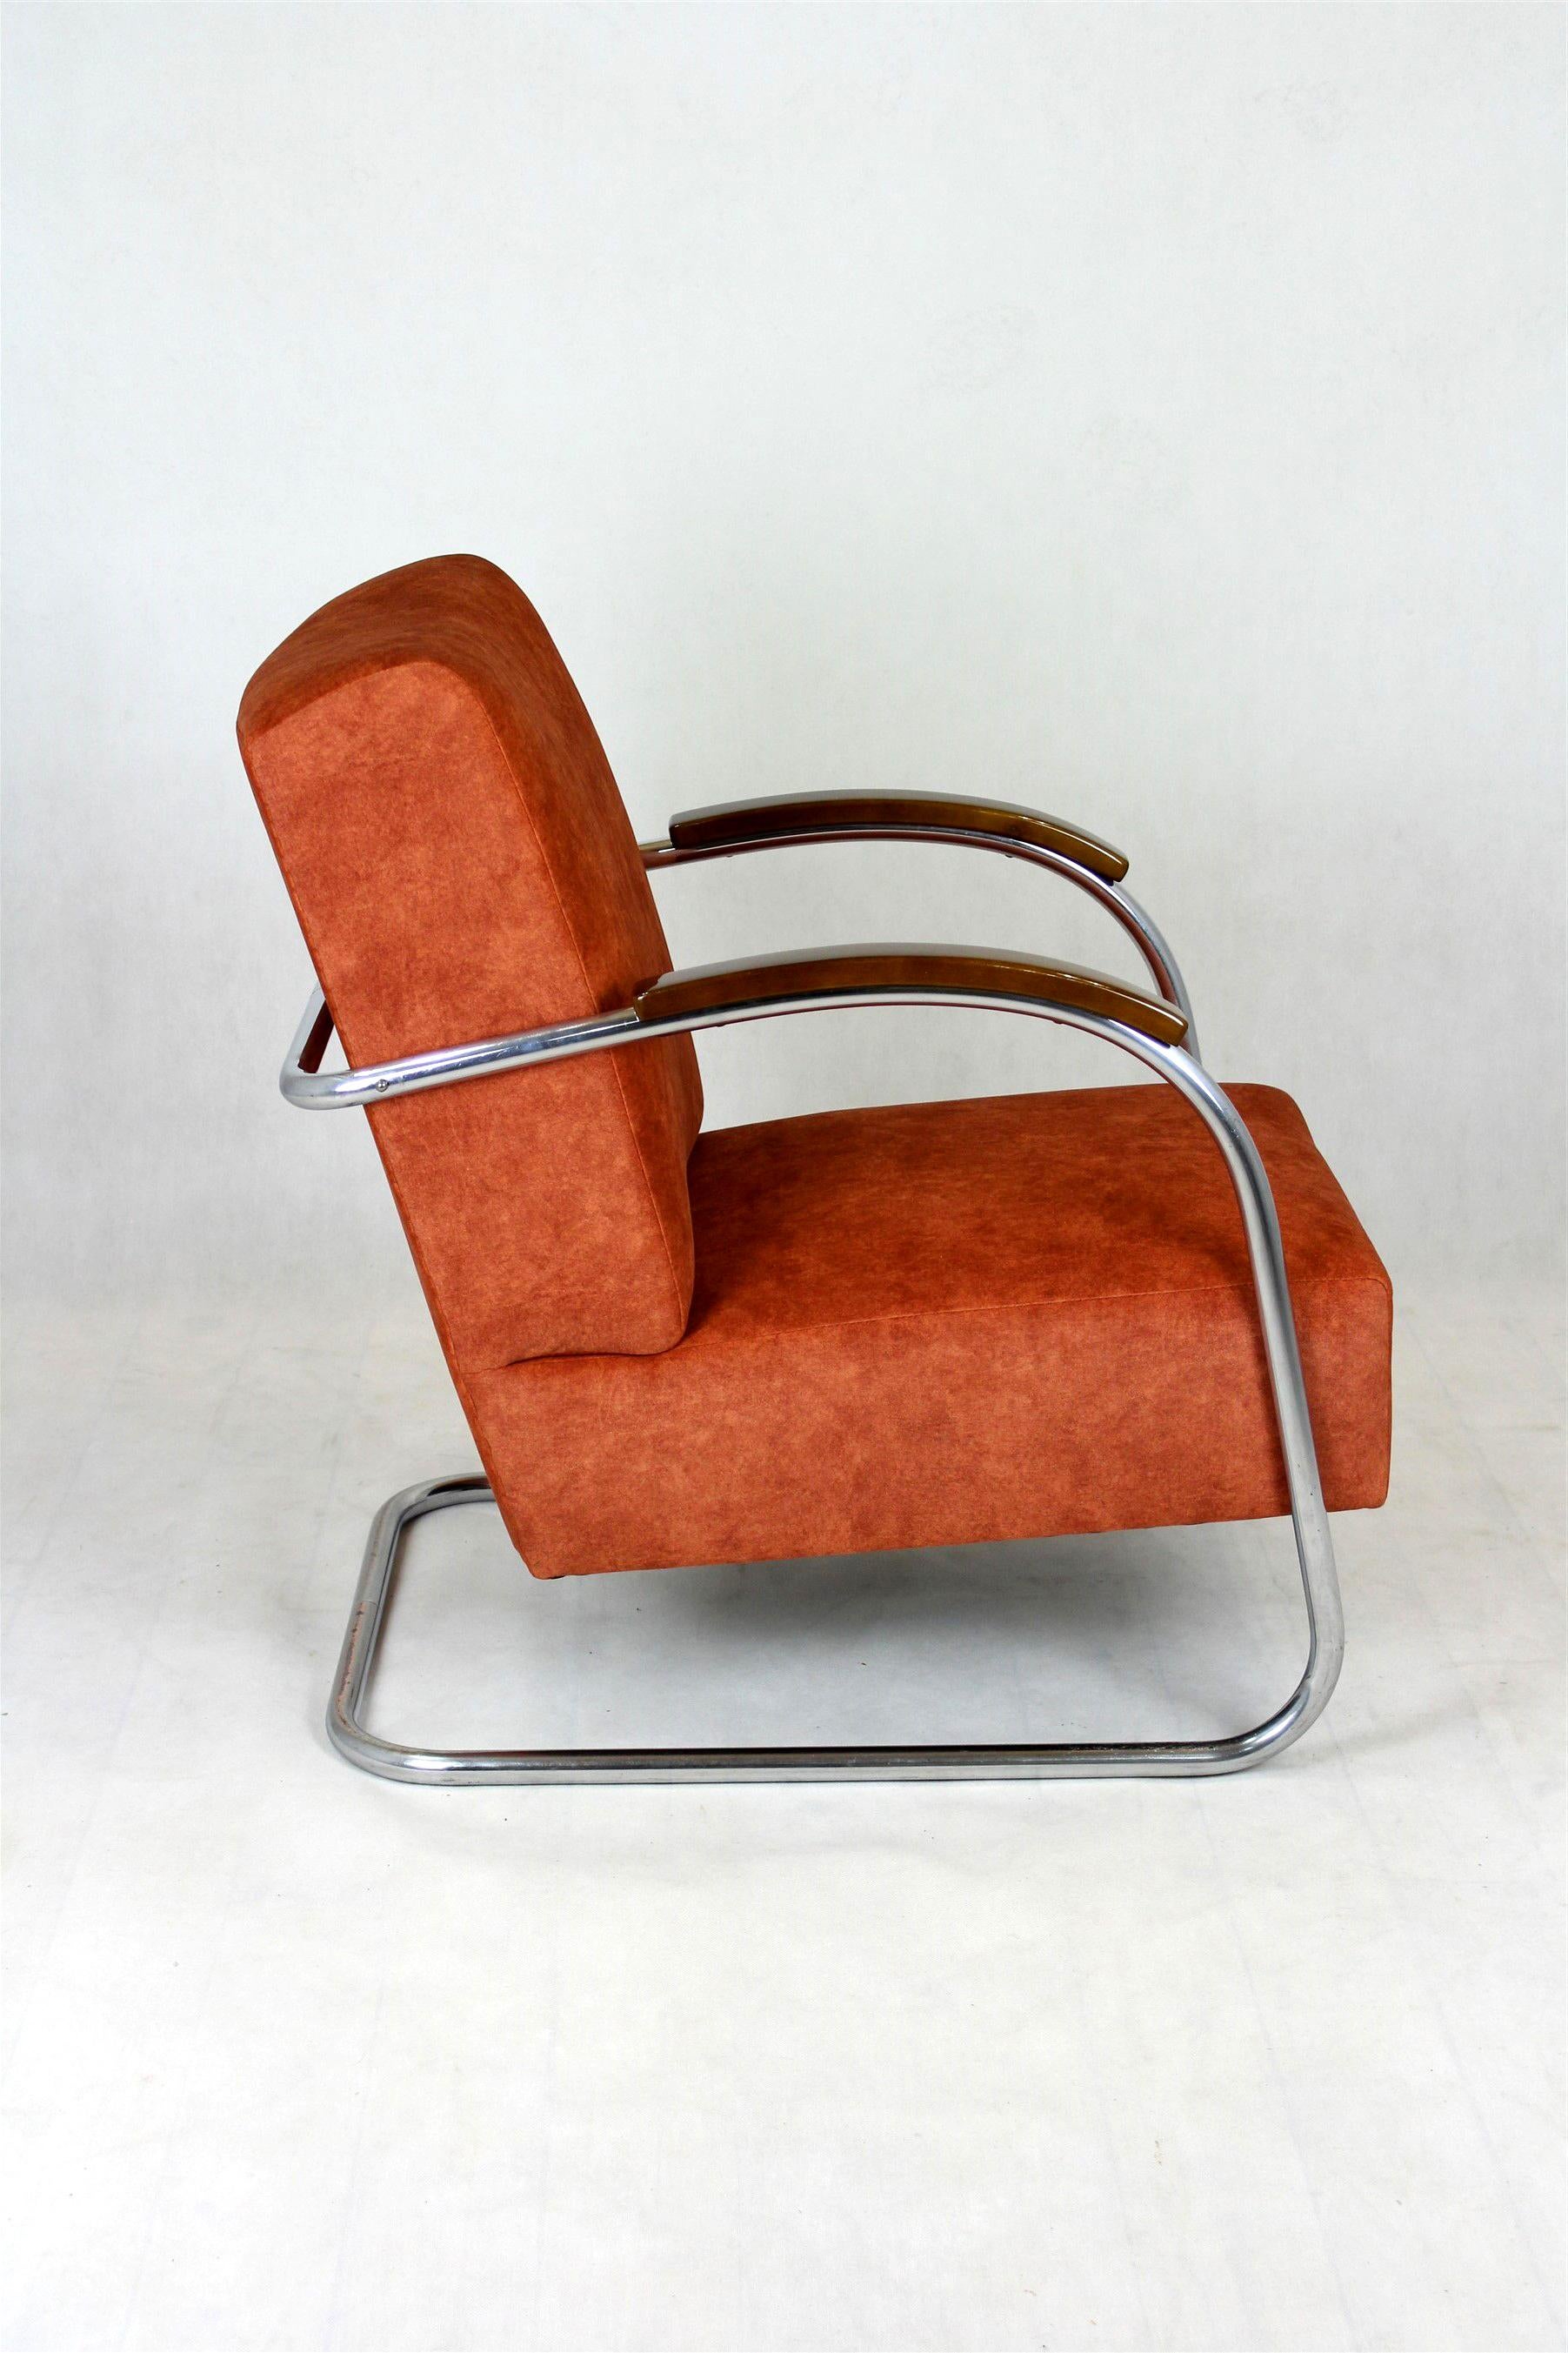 Restored Bauhaus Chromed Tubular Steel Armchair by Mücke Melder, 1930s In Good Condition For Sale In Żory, PL